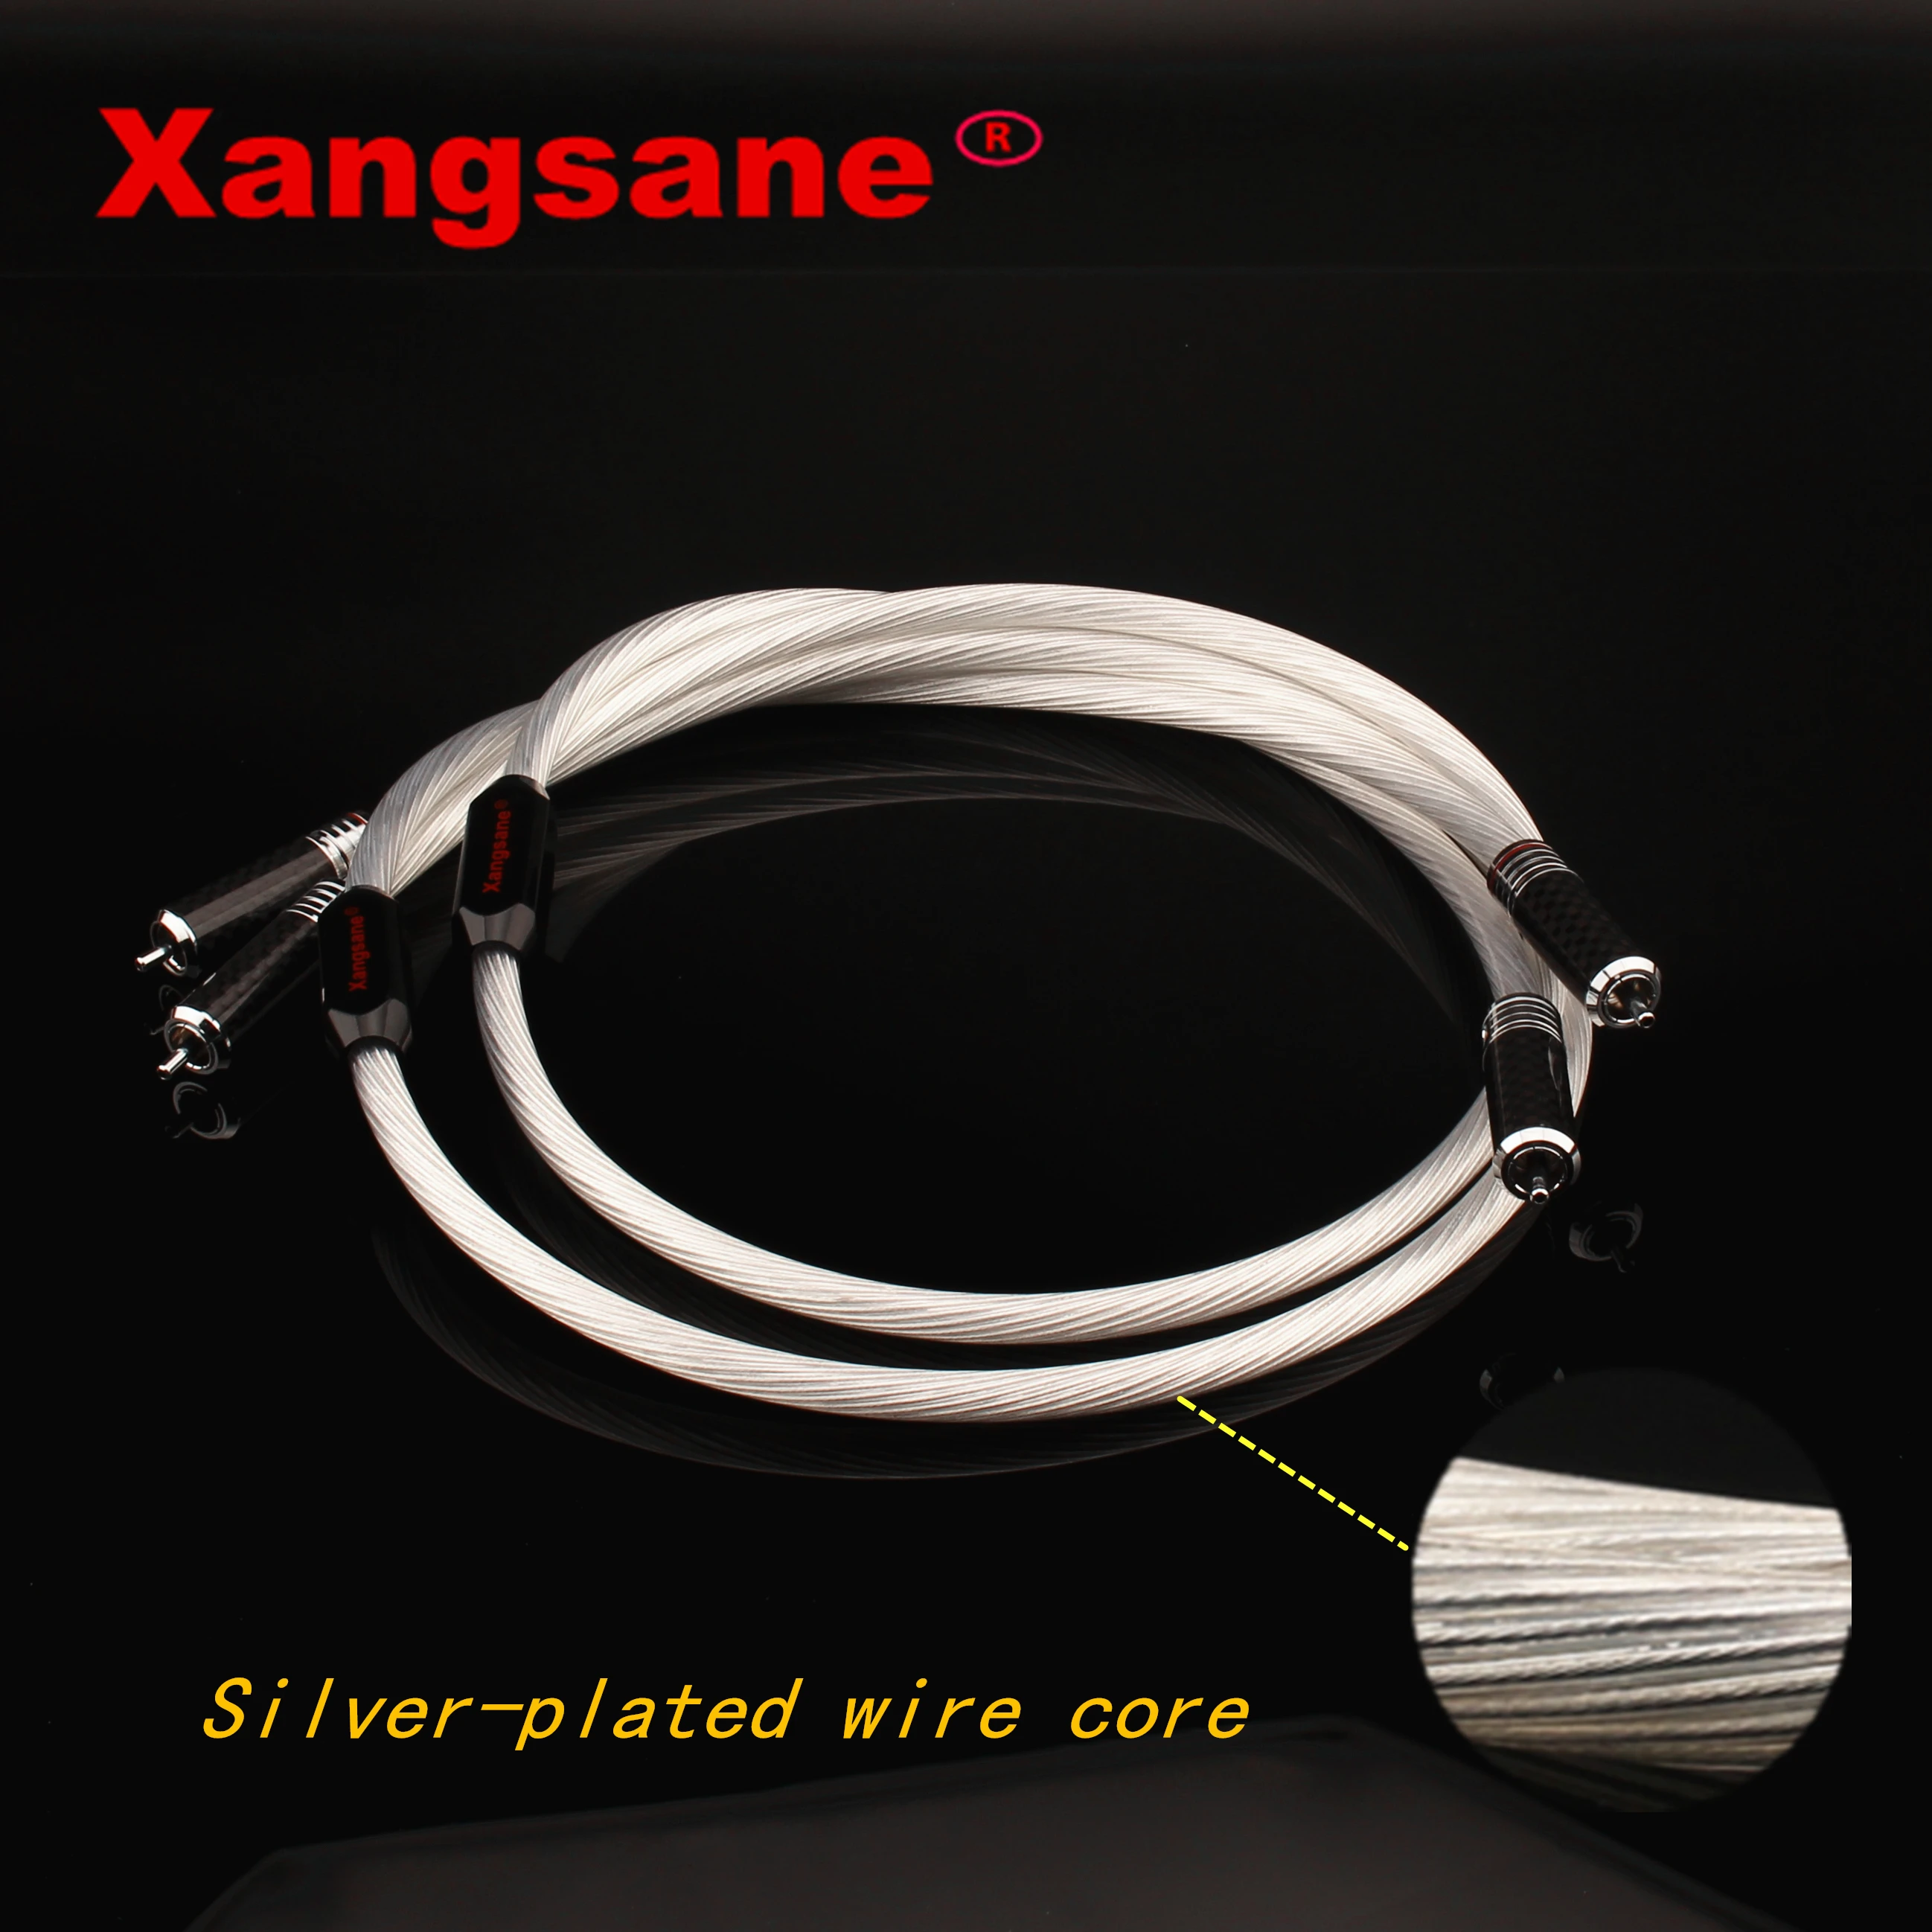 xangsane 5n occ silver plated signal cable hifi rca cable carbon fiber rhodium plated rca plug shielding electronic signals free global shipping